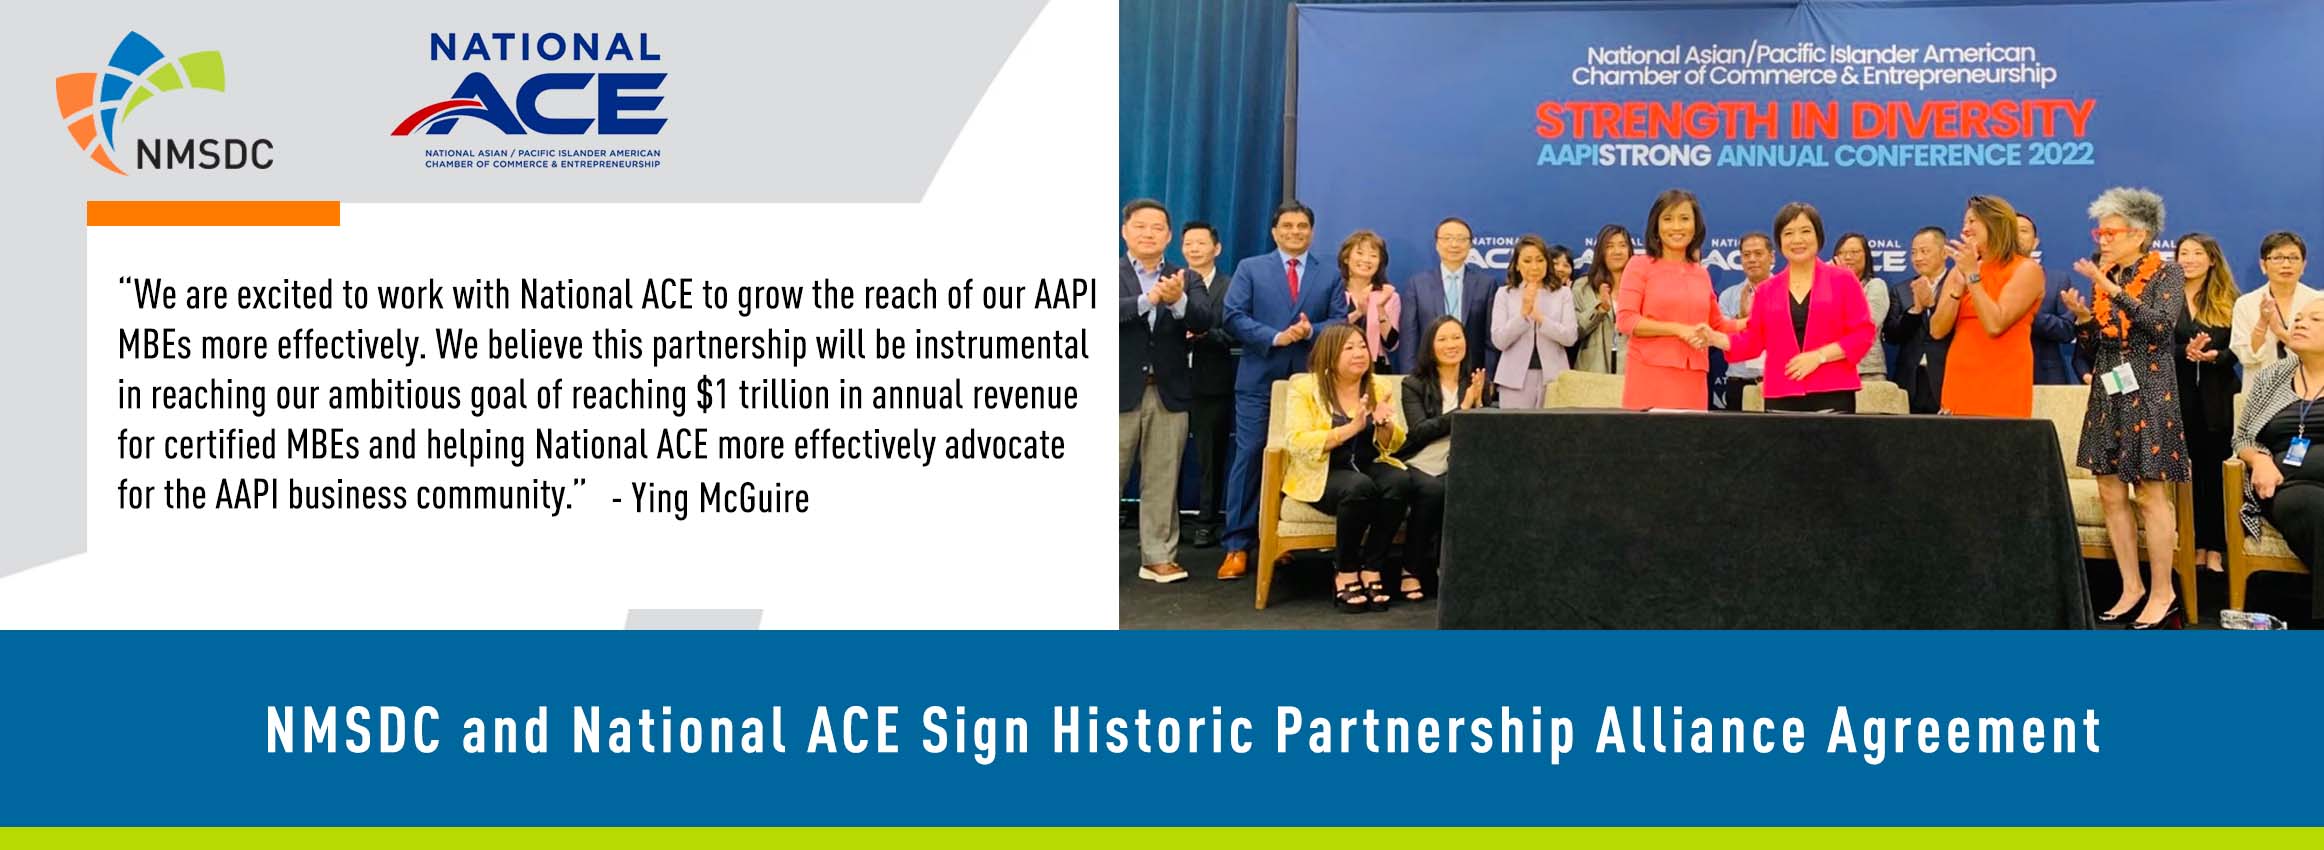 NMSDC and National ACE Sign Historic Partnership Alliance Agreement